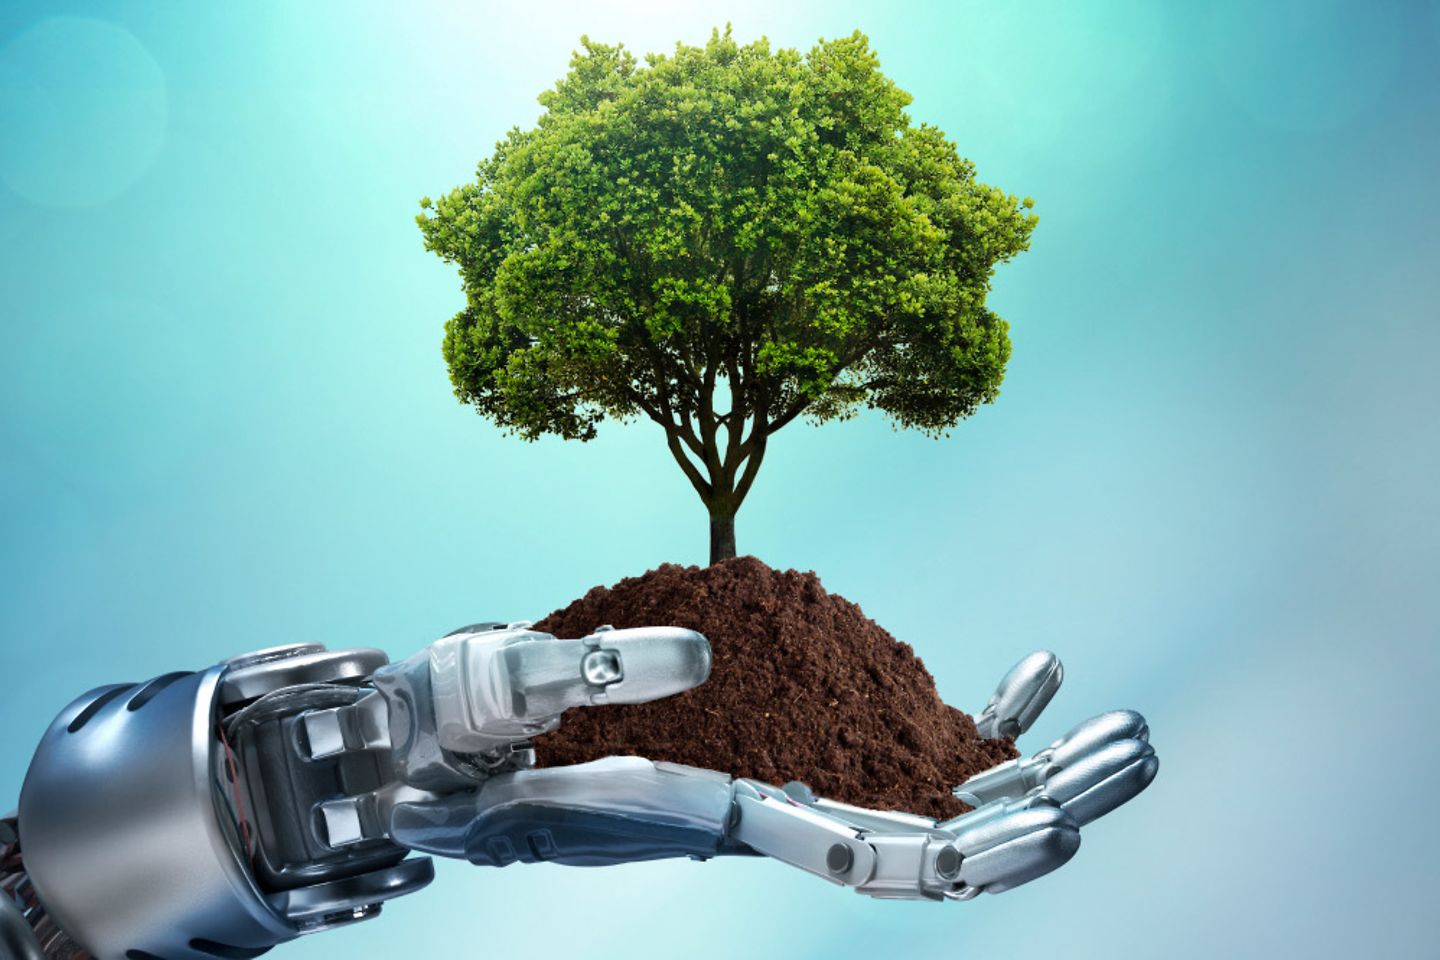 A robotic hand holds a pile of earth and a tree is growing from it